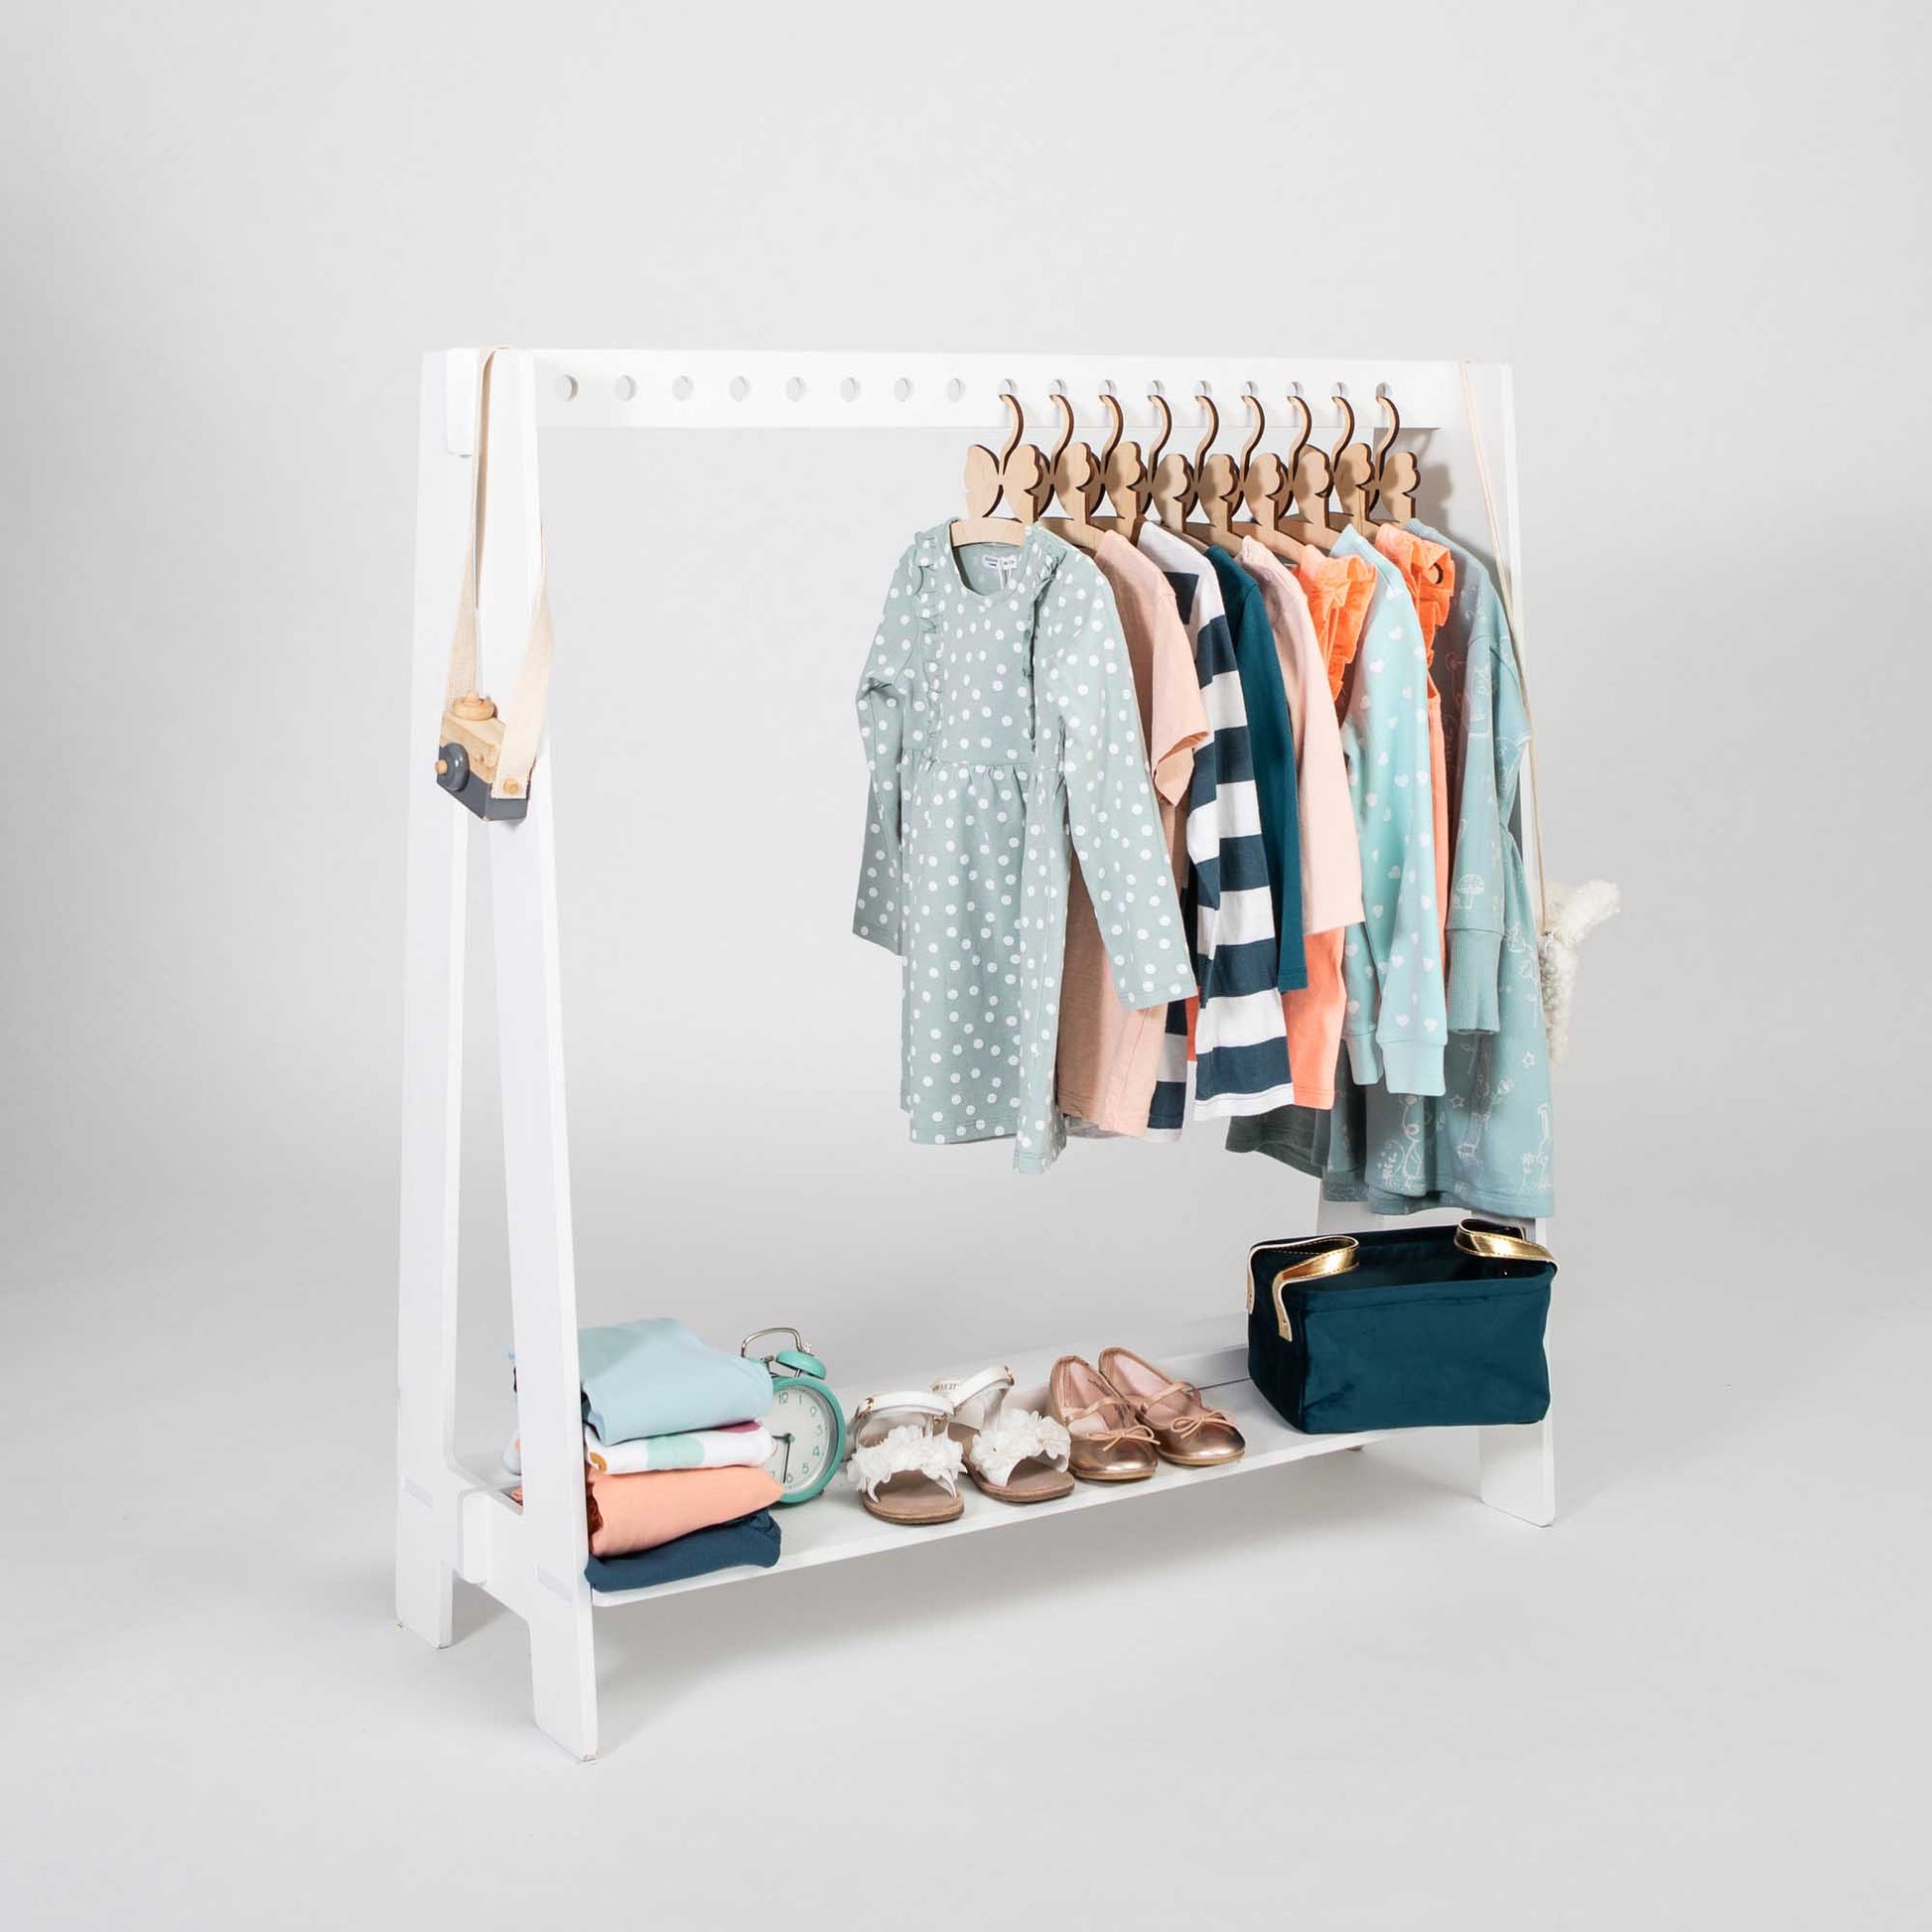 An A-frame kids' clothing rack from Sweet Home From Wood with kids clothing hanging on it.